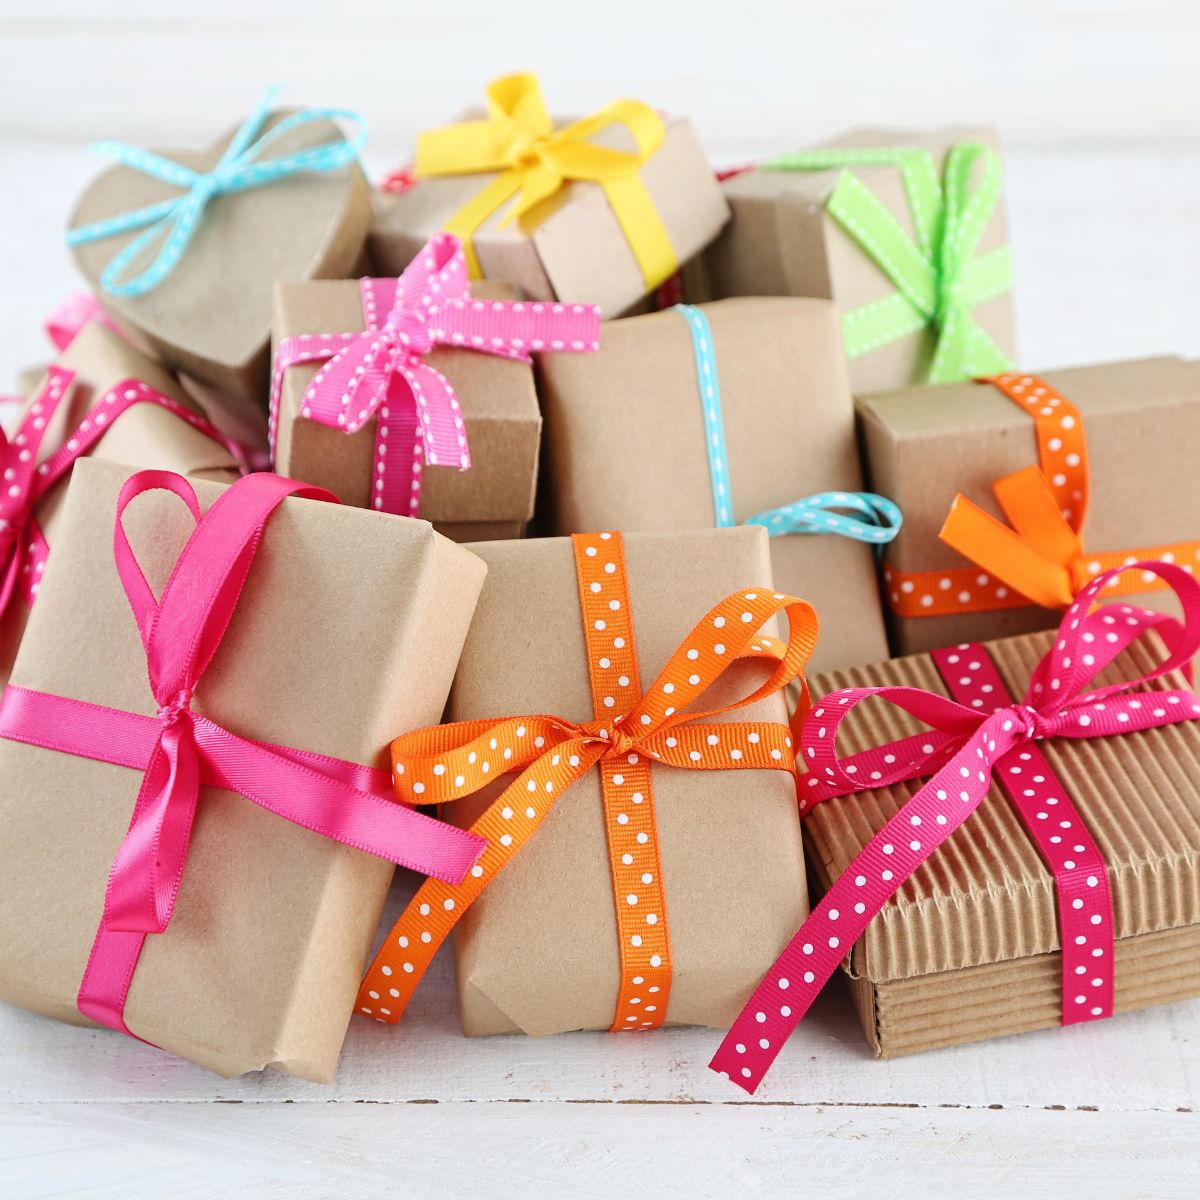 A pile of gift boxes with colorful ribbons on a white recipe index.